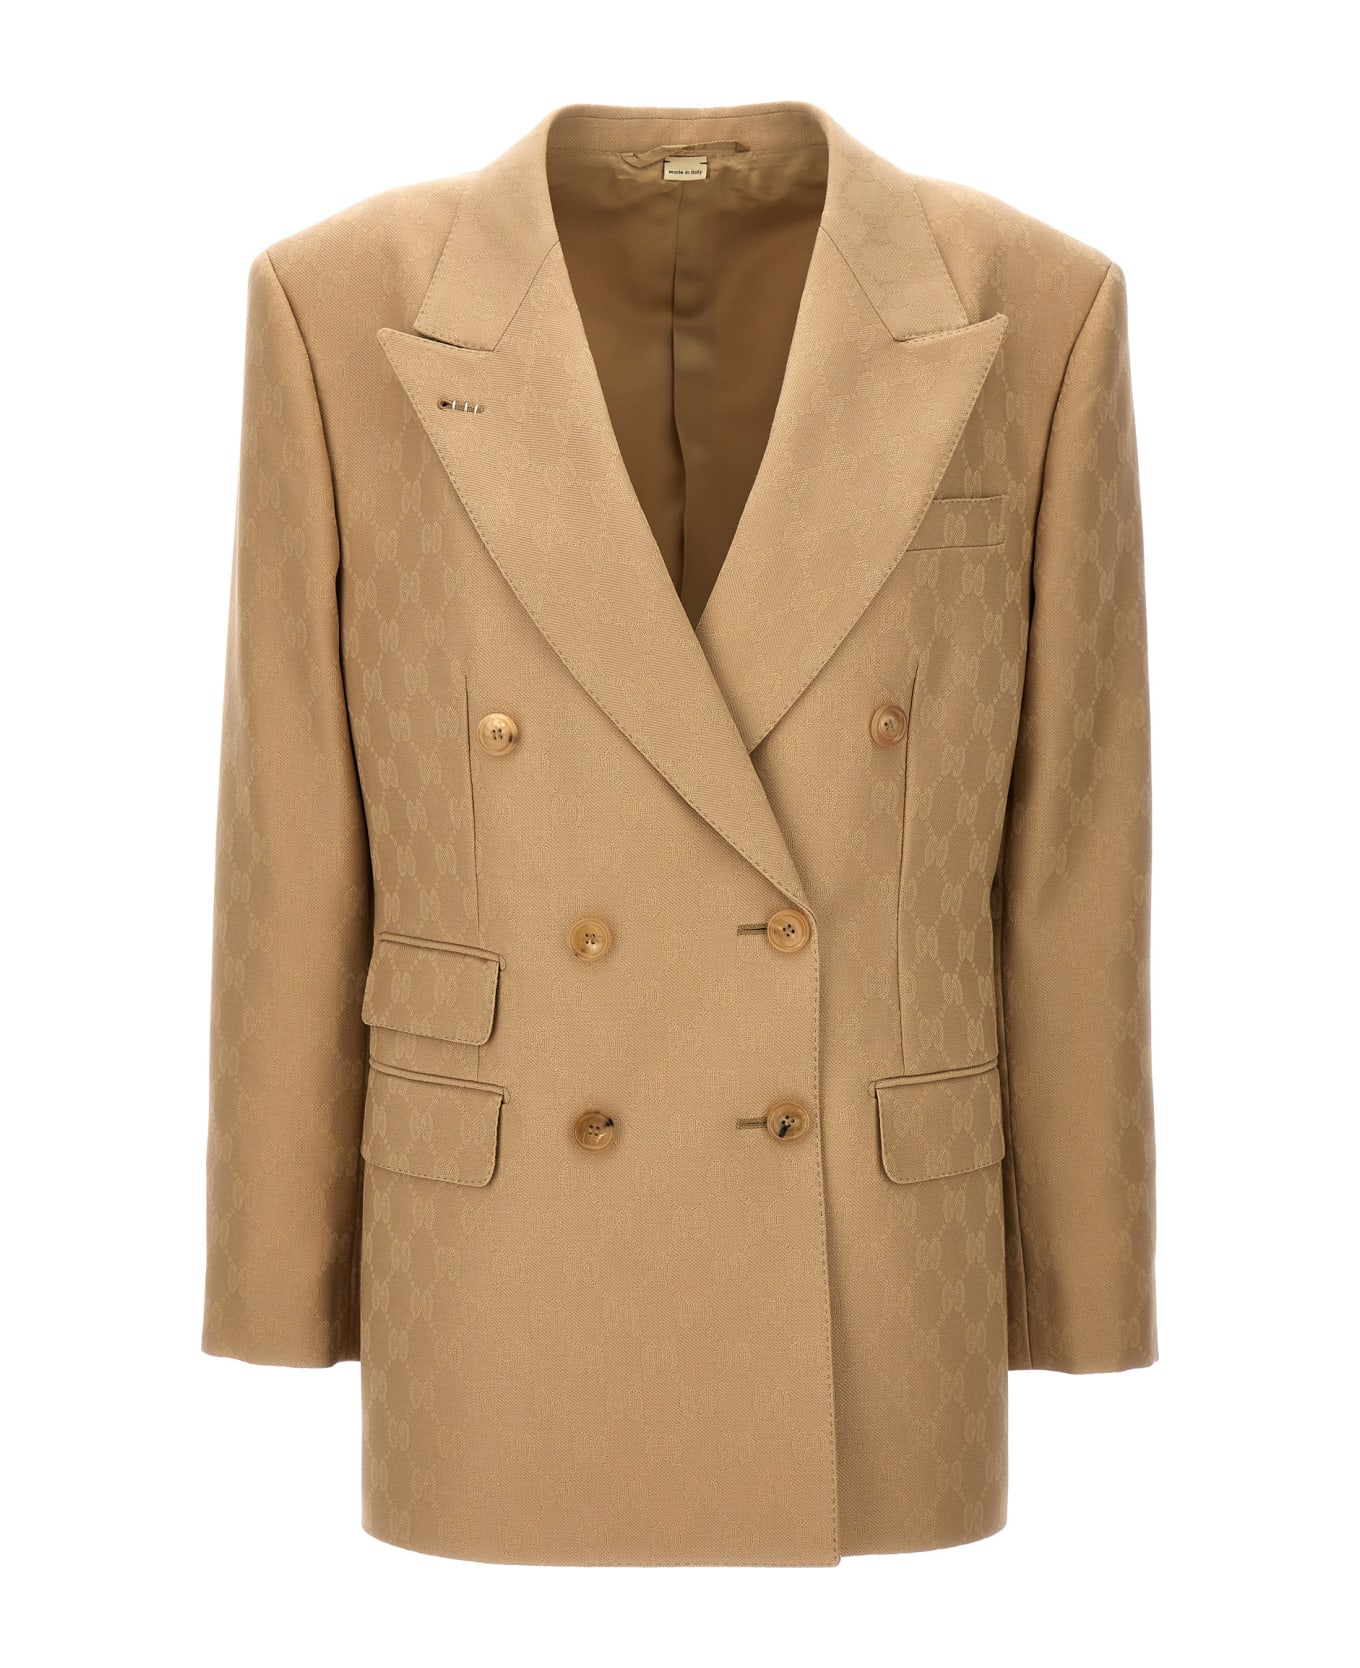 Gucci 'gg' Double-breasted Blazer - Beige コート